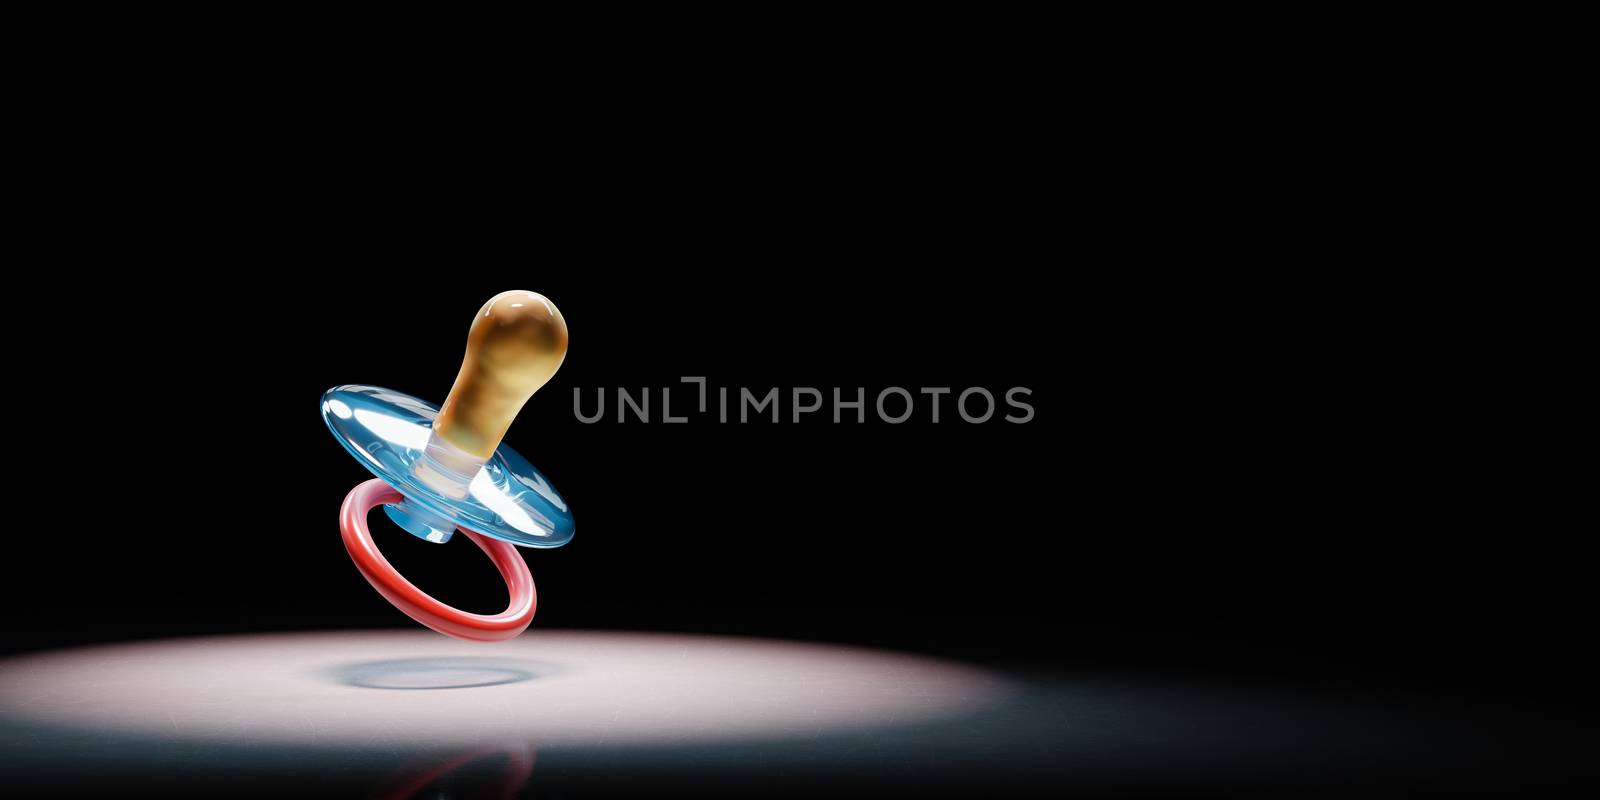 Blue and Red Baby's Pacifier Spotlighted on Black Background with Copy Space 3D Illustration